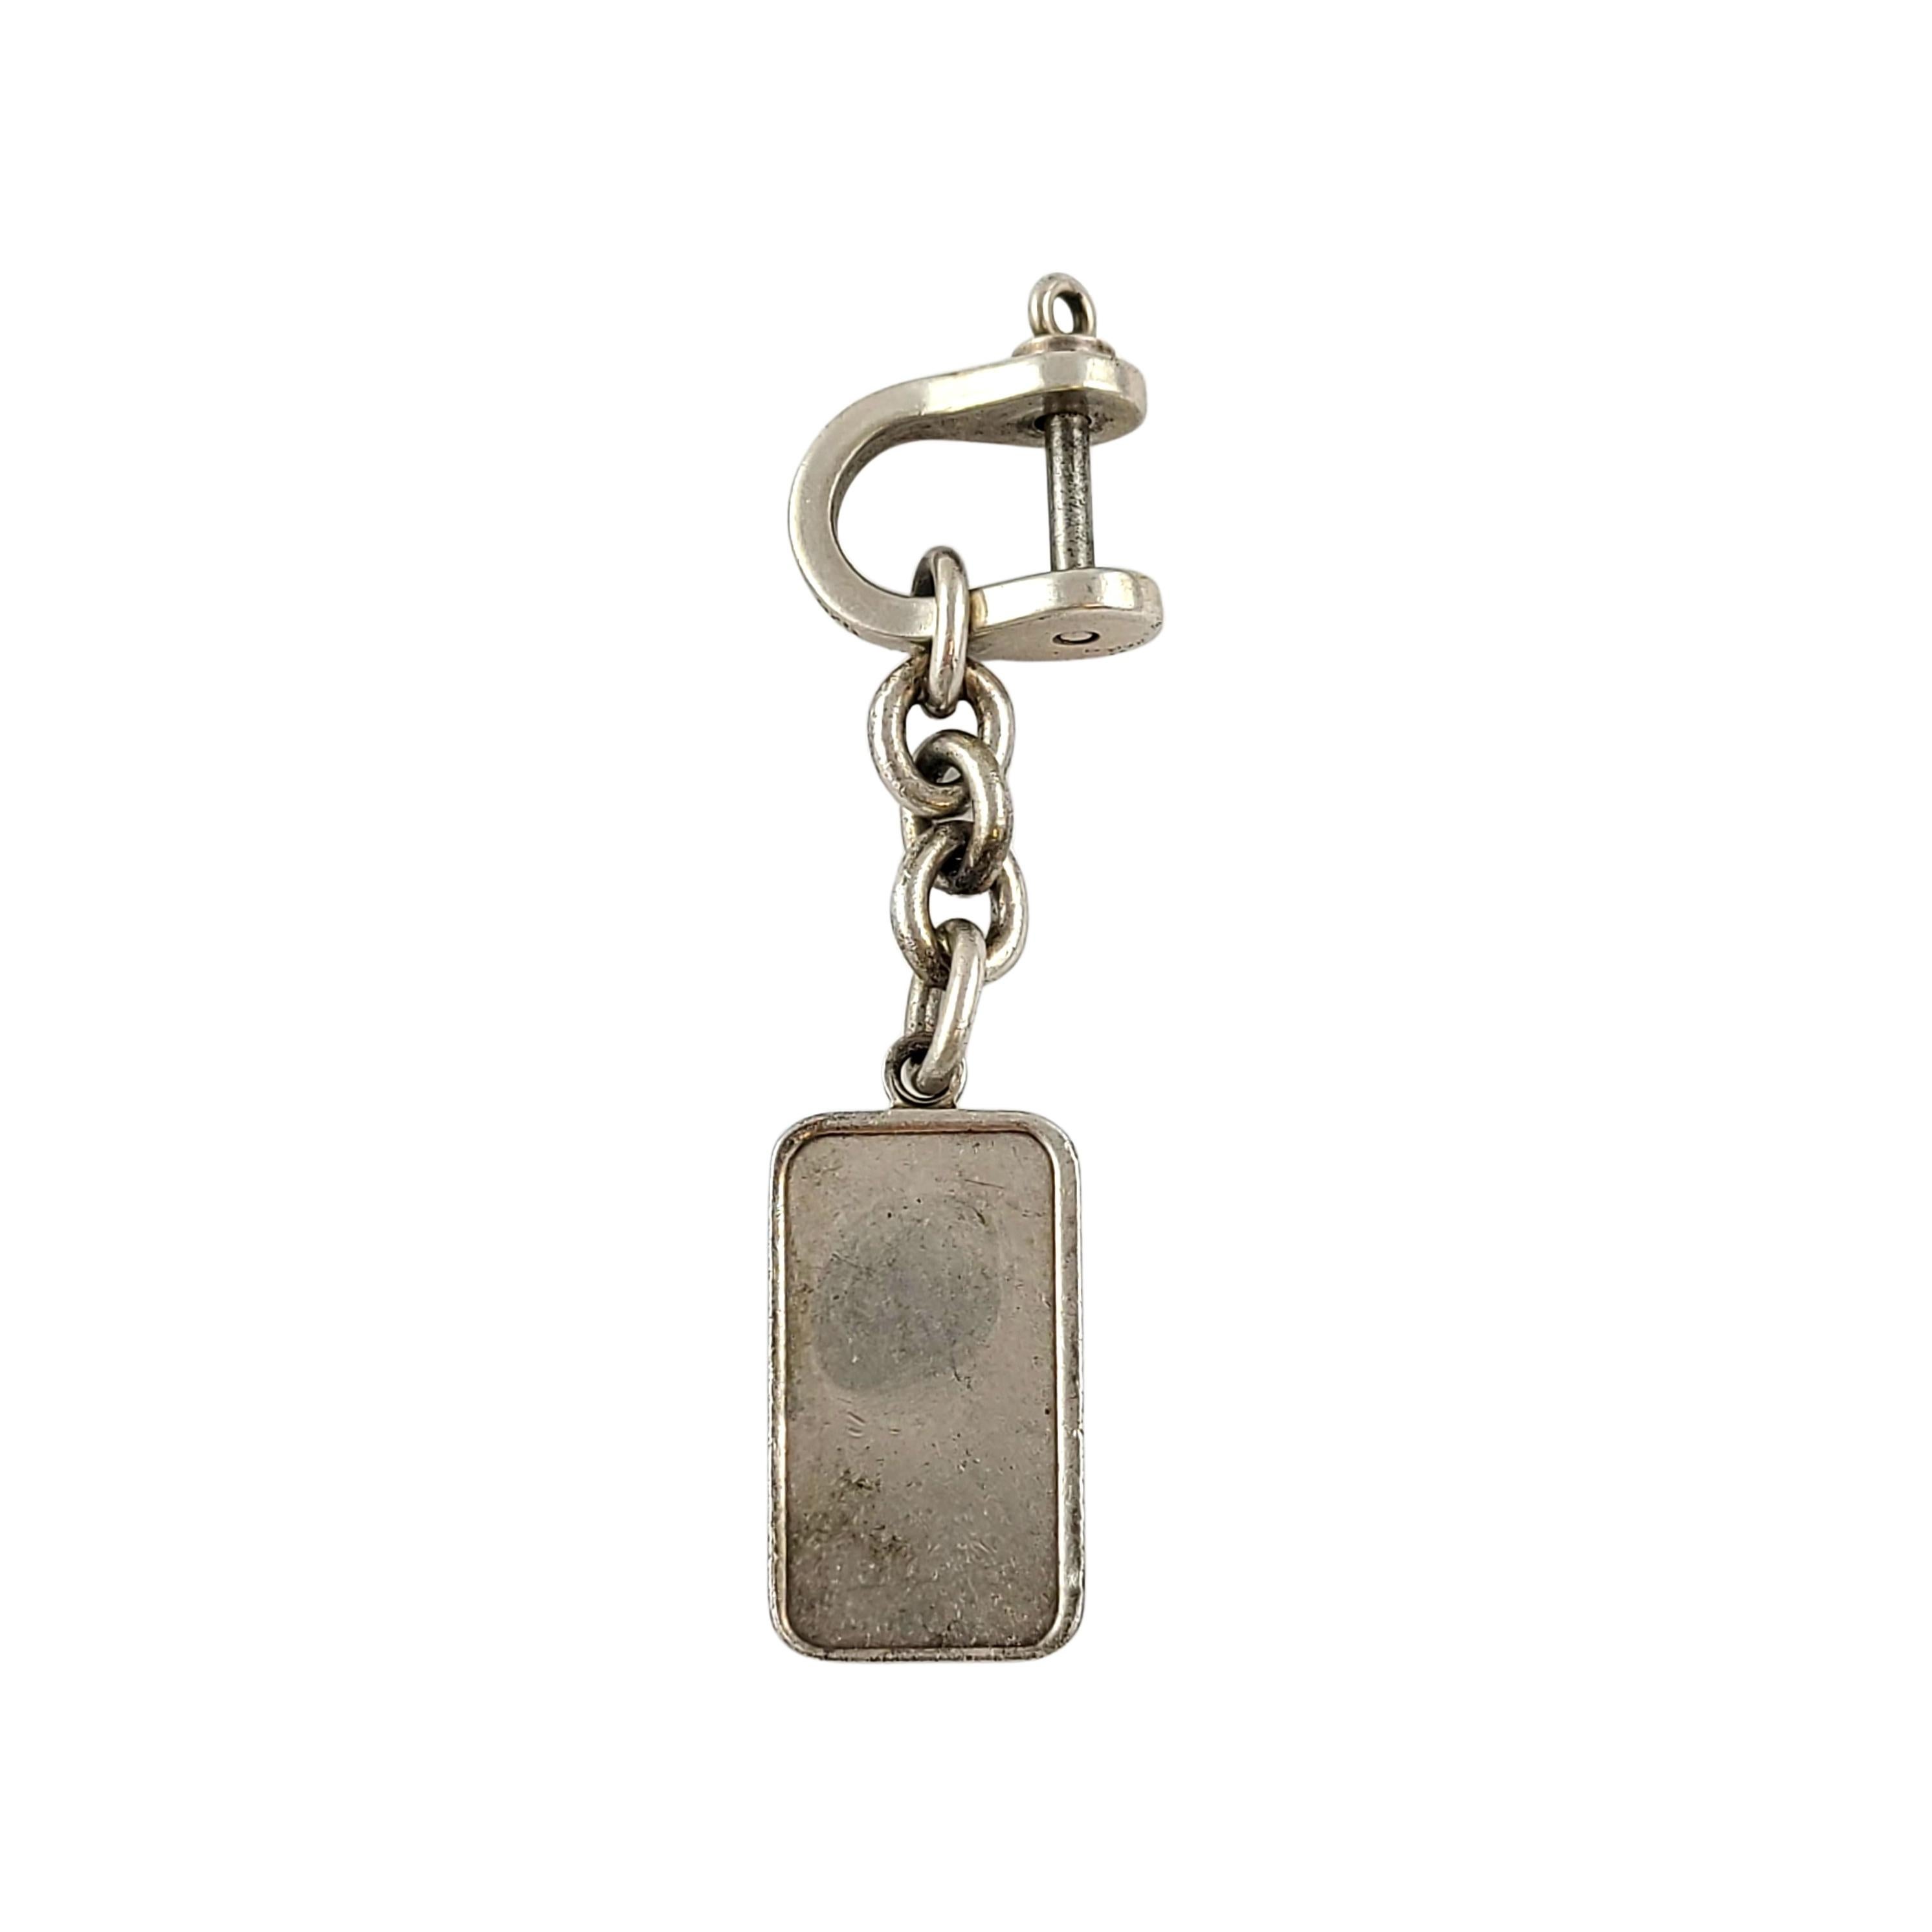 Tiffany & Co sterling silver keychain with 1/2 troy oz .999 silver ingot.

This classic sterling silver keychain is in a horsebit shape which unscrews to open to add keys. It features a 1/2 troy oz .999 silver ingot with a vintage T&CO logo. Tiffany